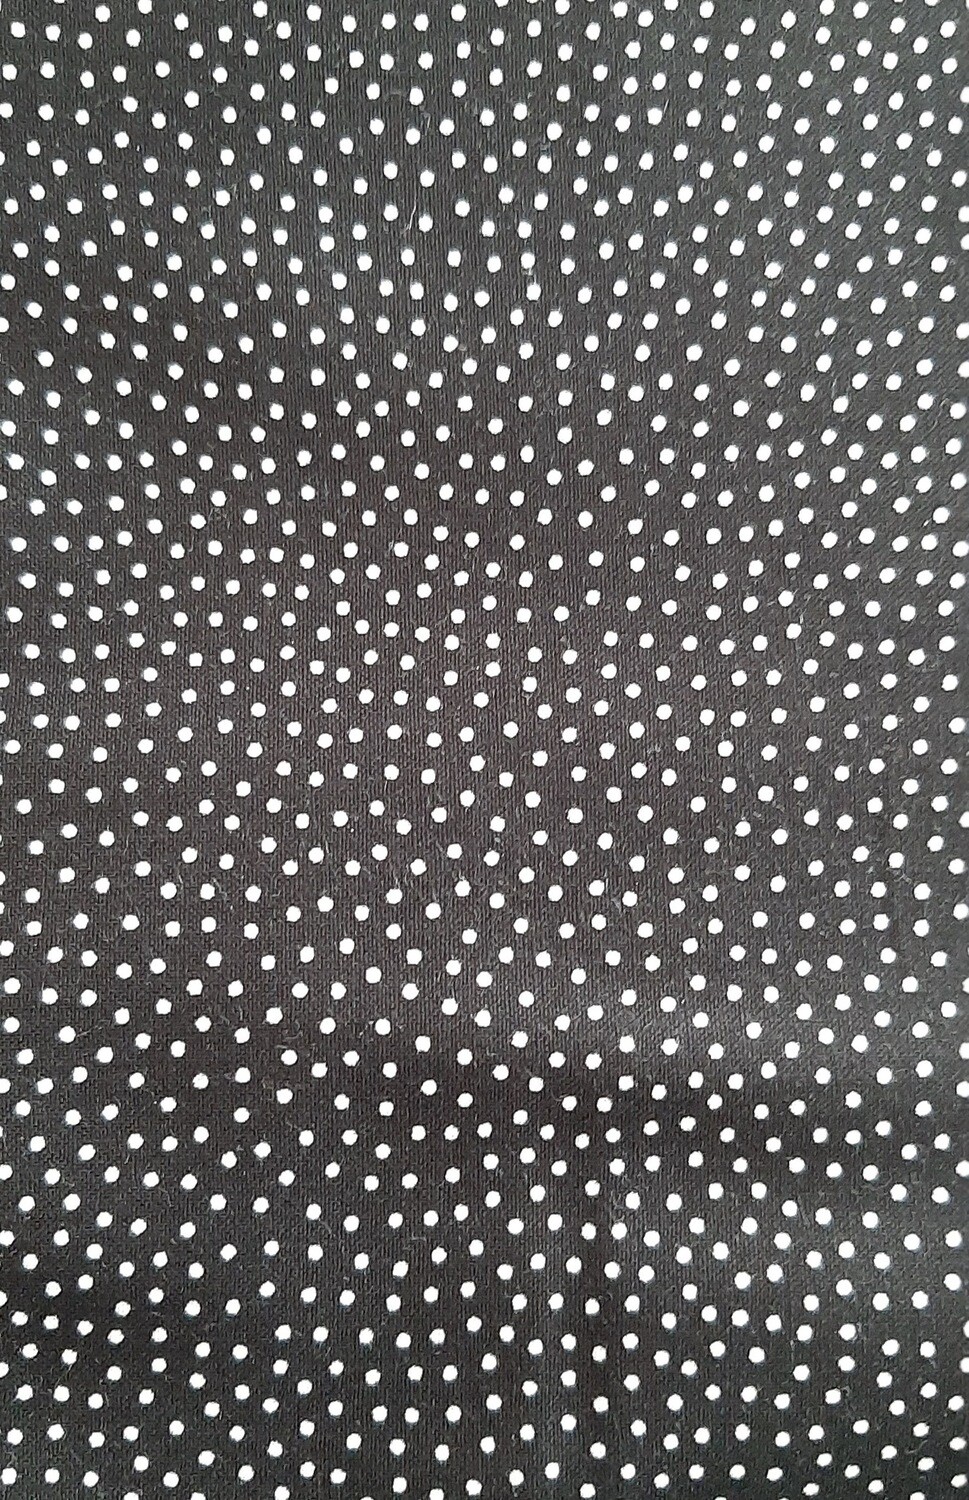 BLACK WITH FRECKLE DOTS